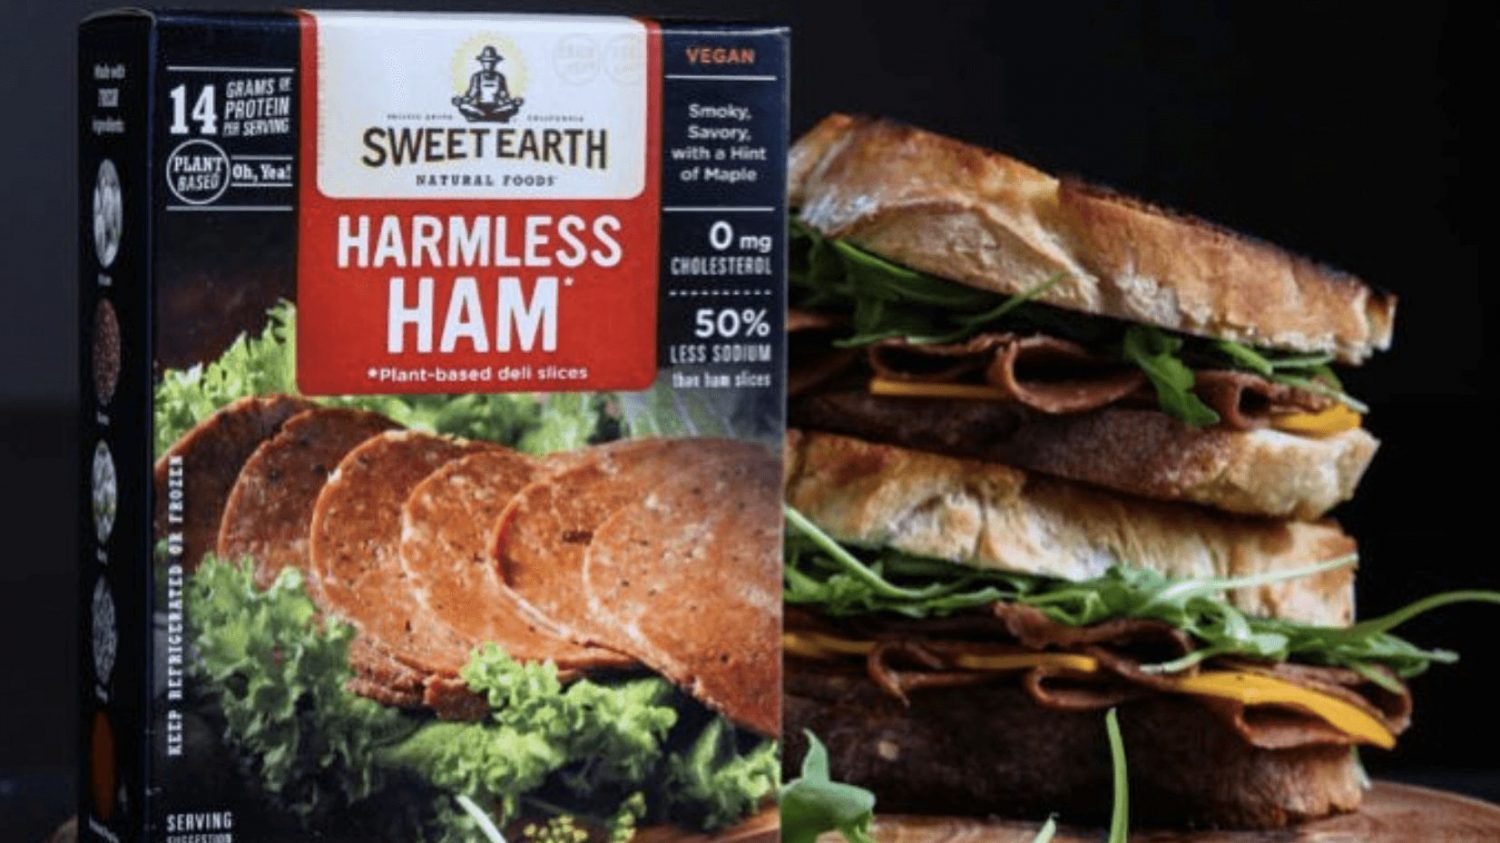 World’s Largest Food Company Says Its Vegan Products Will Surpass $1 Billion by 2029